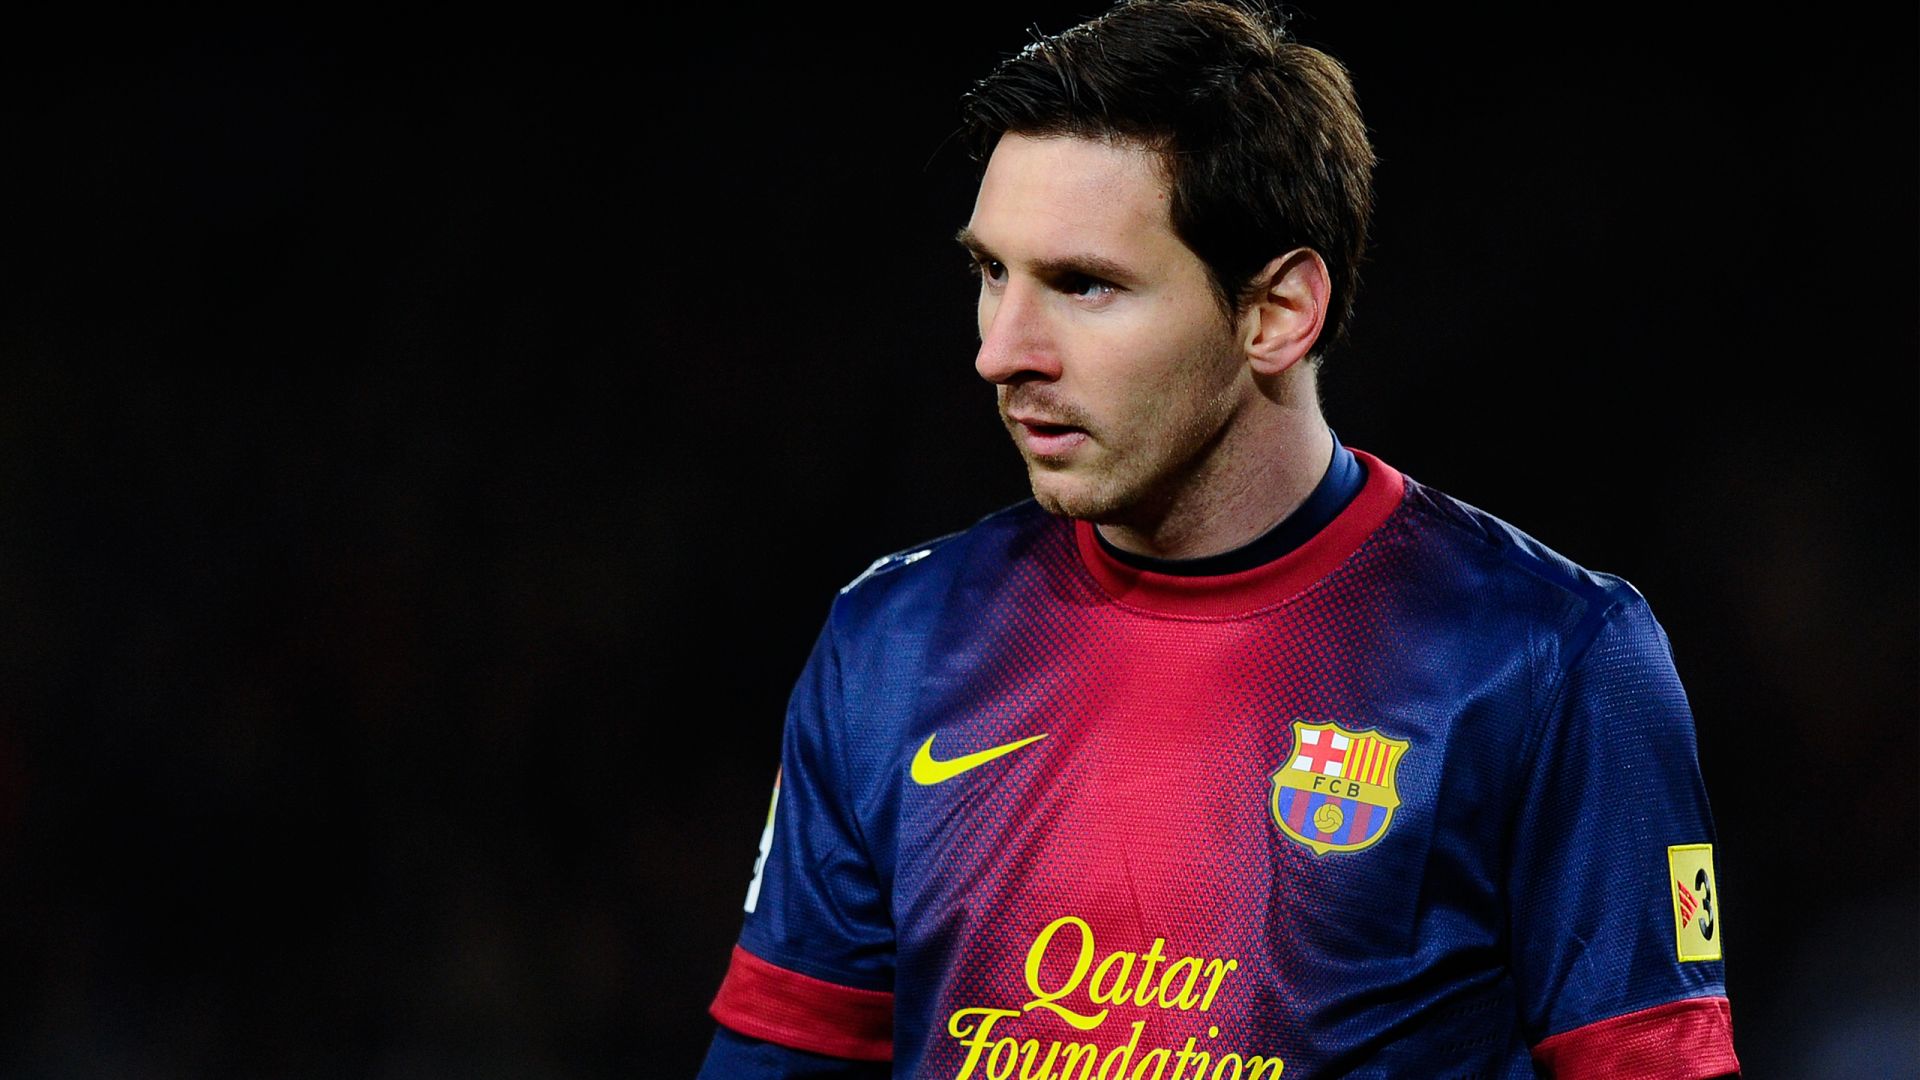 Wallpaper Lionel Messi football player